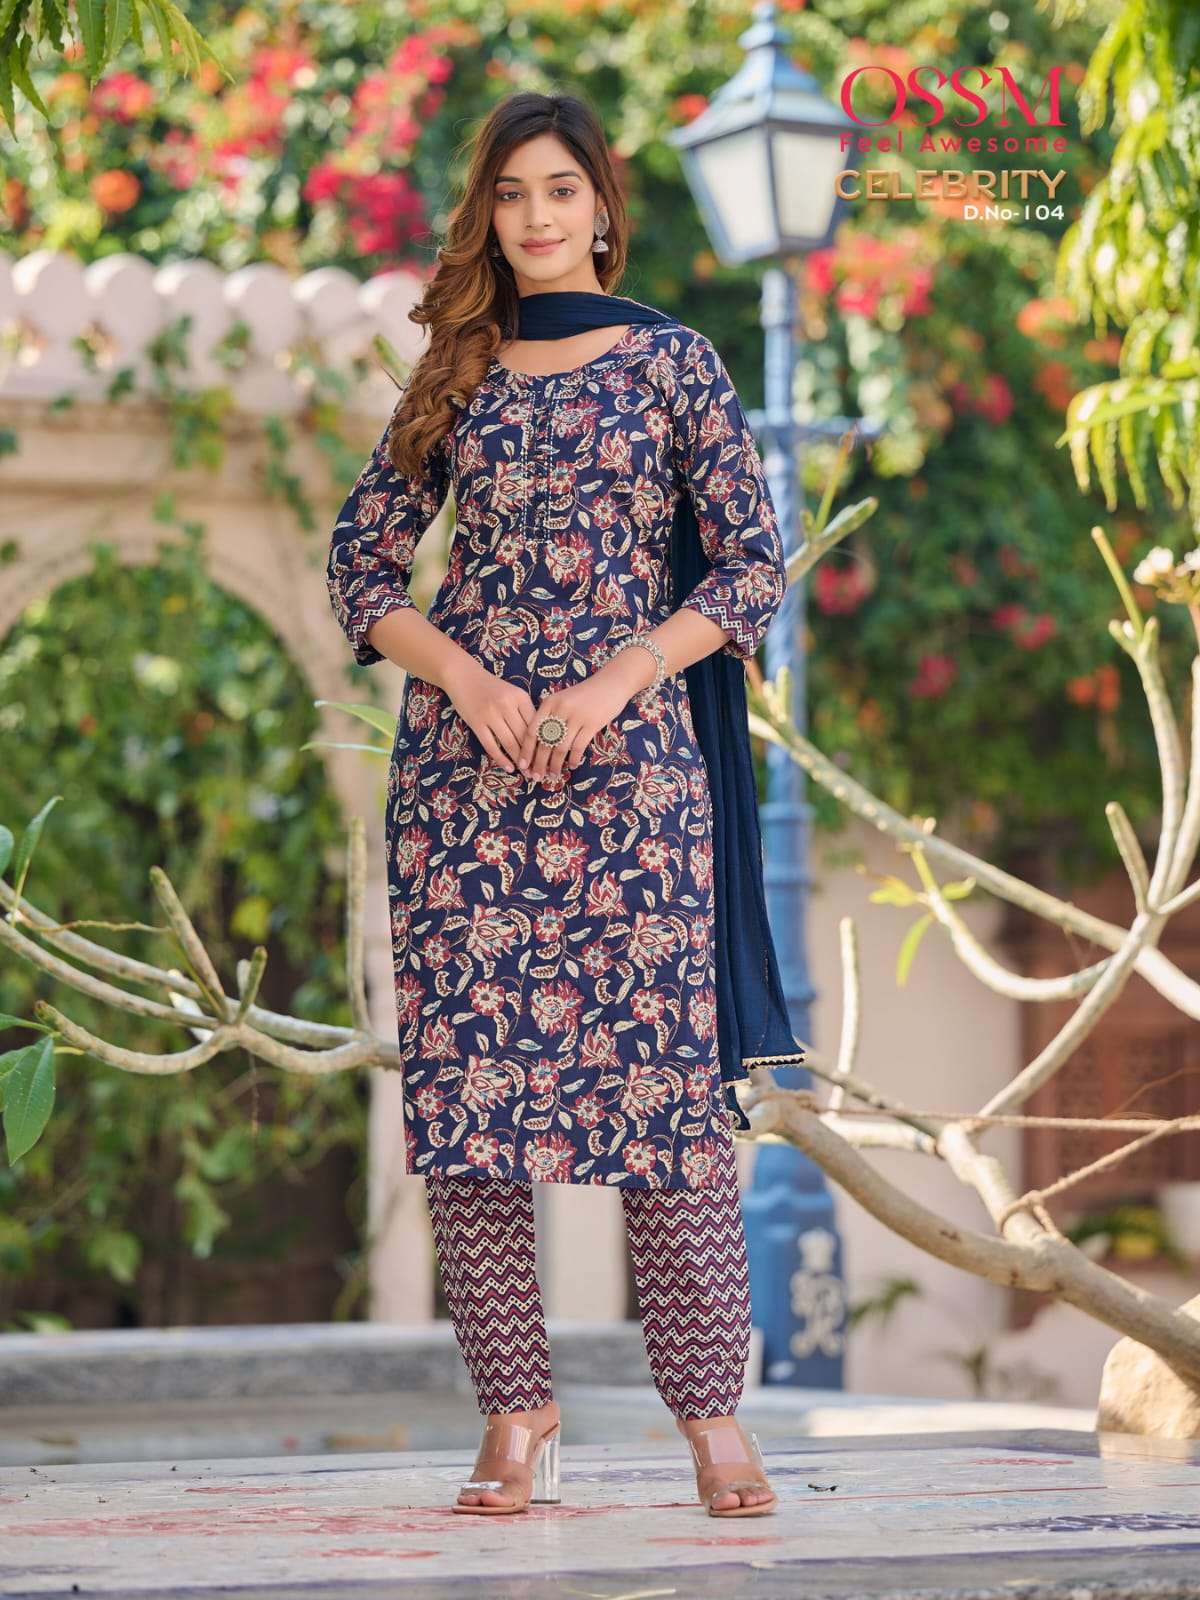 CELEBRITY VOL-1 BY OSSM 101 TO 106 SERIES BEAUTIFUL SUITS COLORFUL STYLISH FANCY CASUAL WEAR & ETHNIC WEAR COTTON PRINT DRESSES AT WHOLESALE PRICE